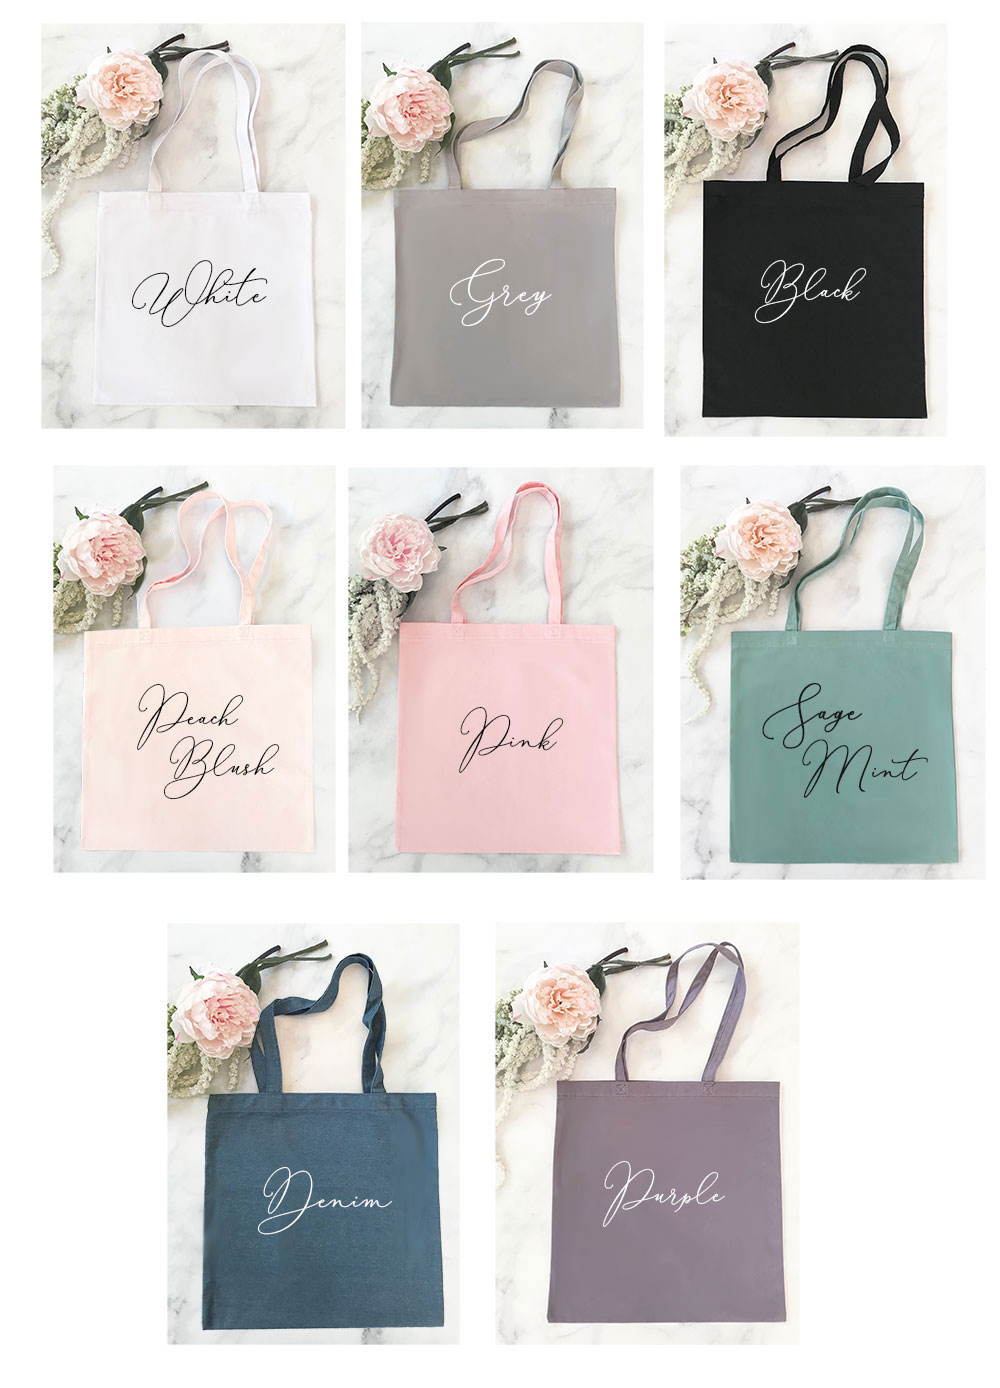 Canvas Tote Bag with Name in Heart - Personalized Brides